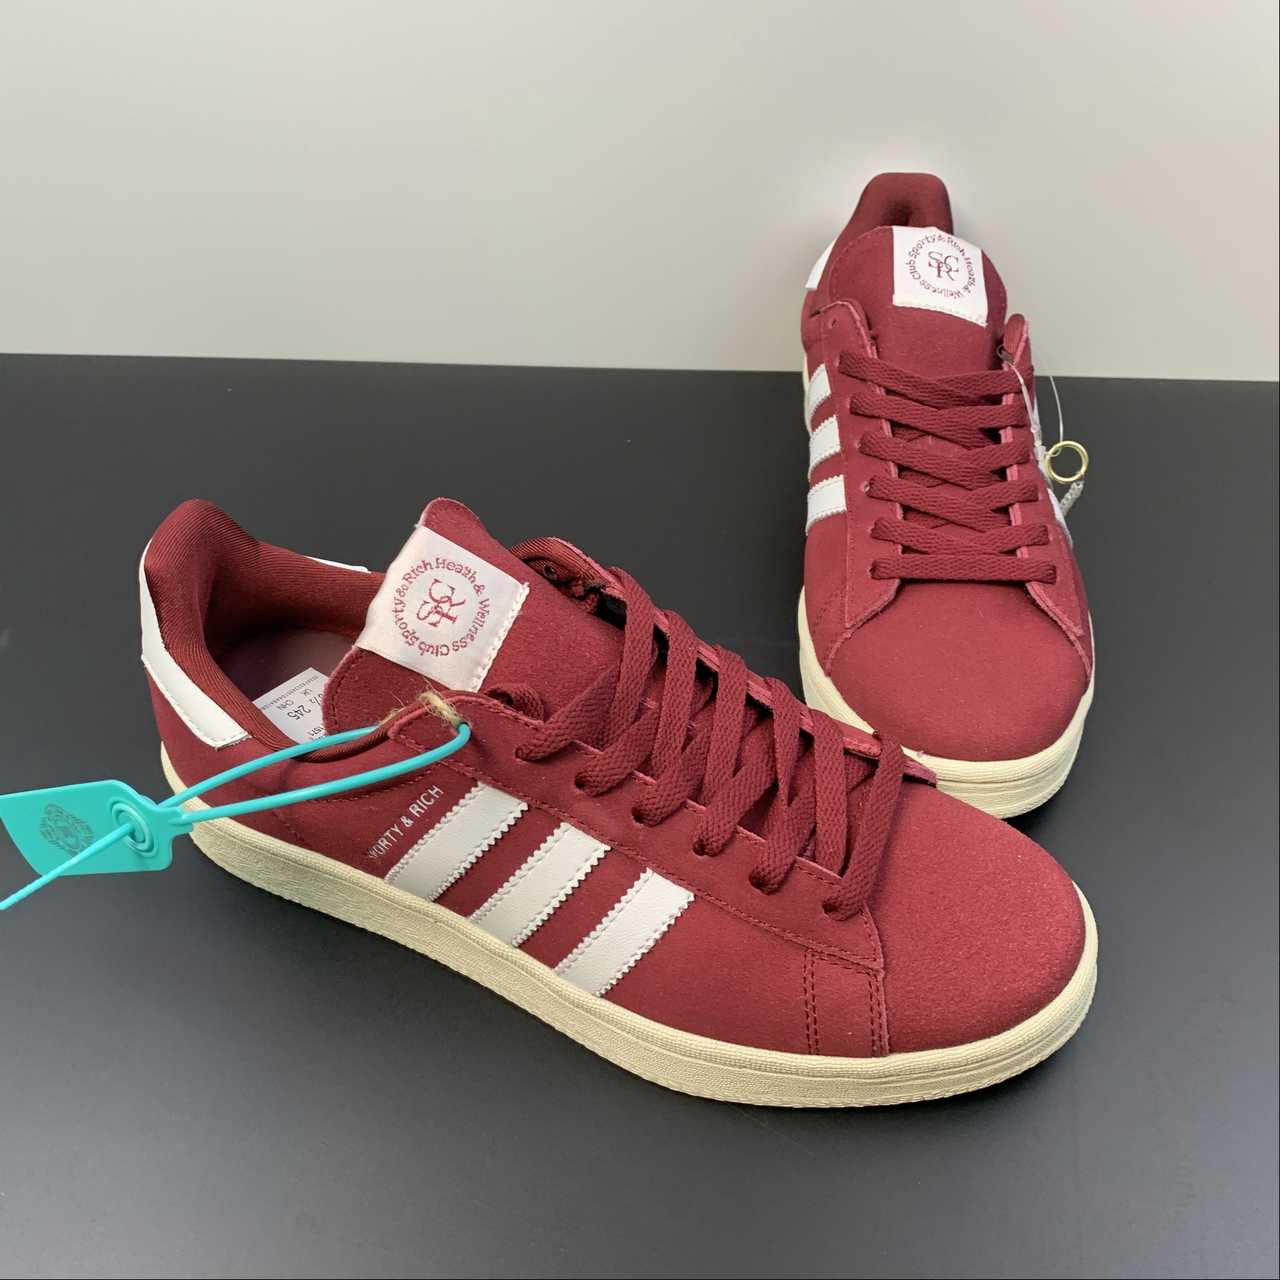 Chaussures Adidas Campus rouges